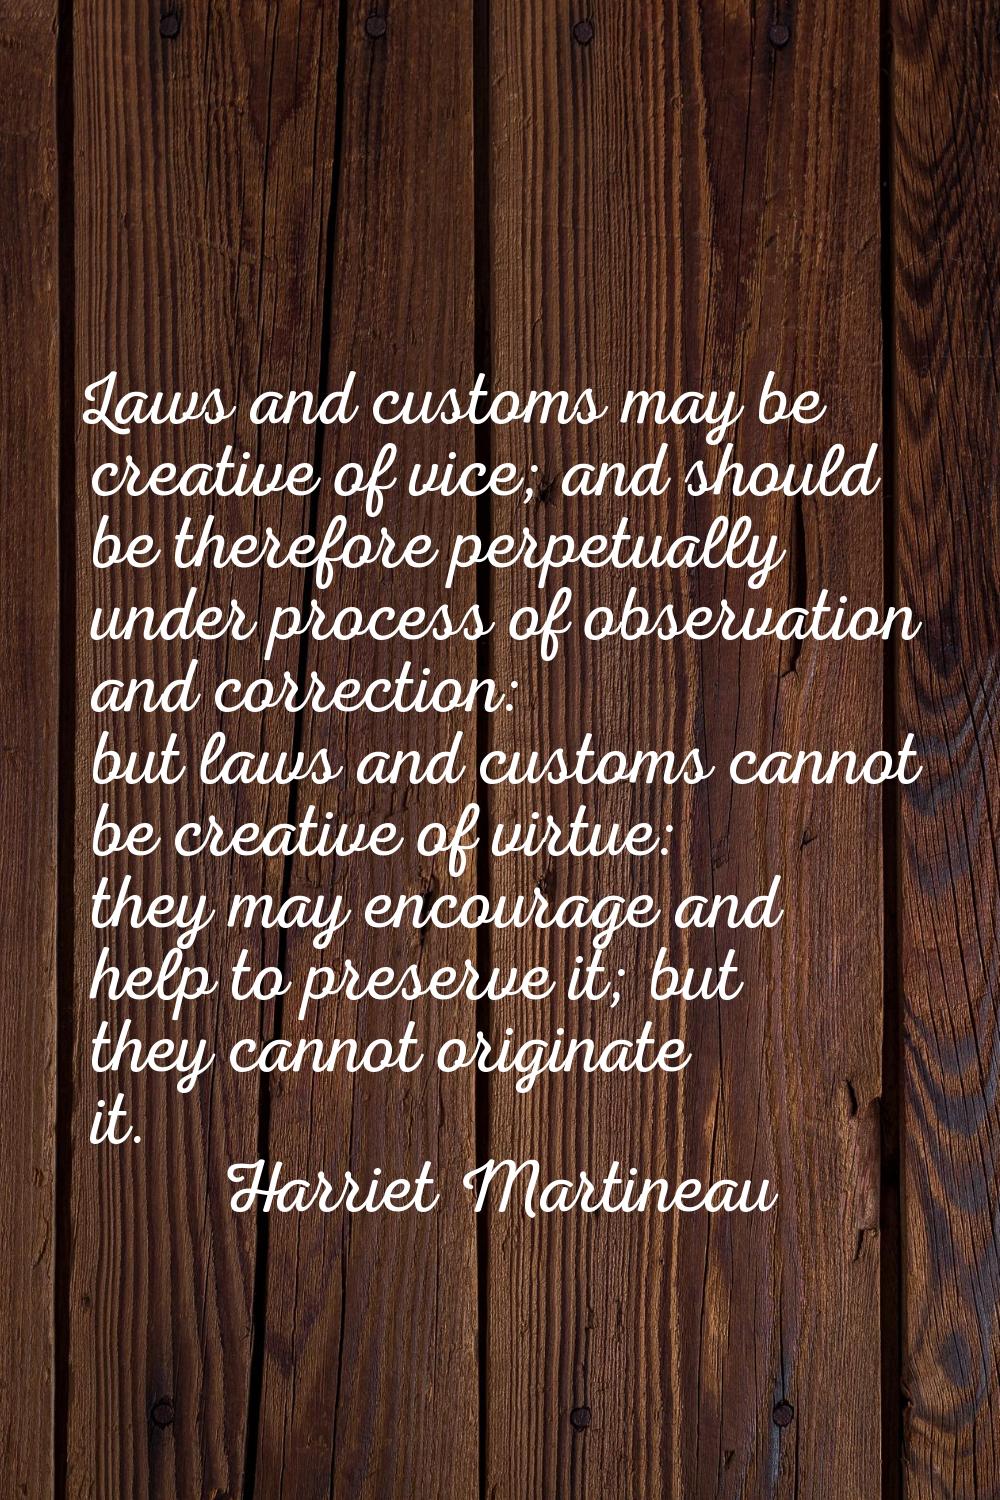 Laws and customs may be creative of vice; and should be therefore perpetually under process of obse